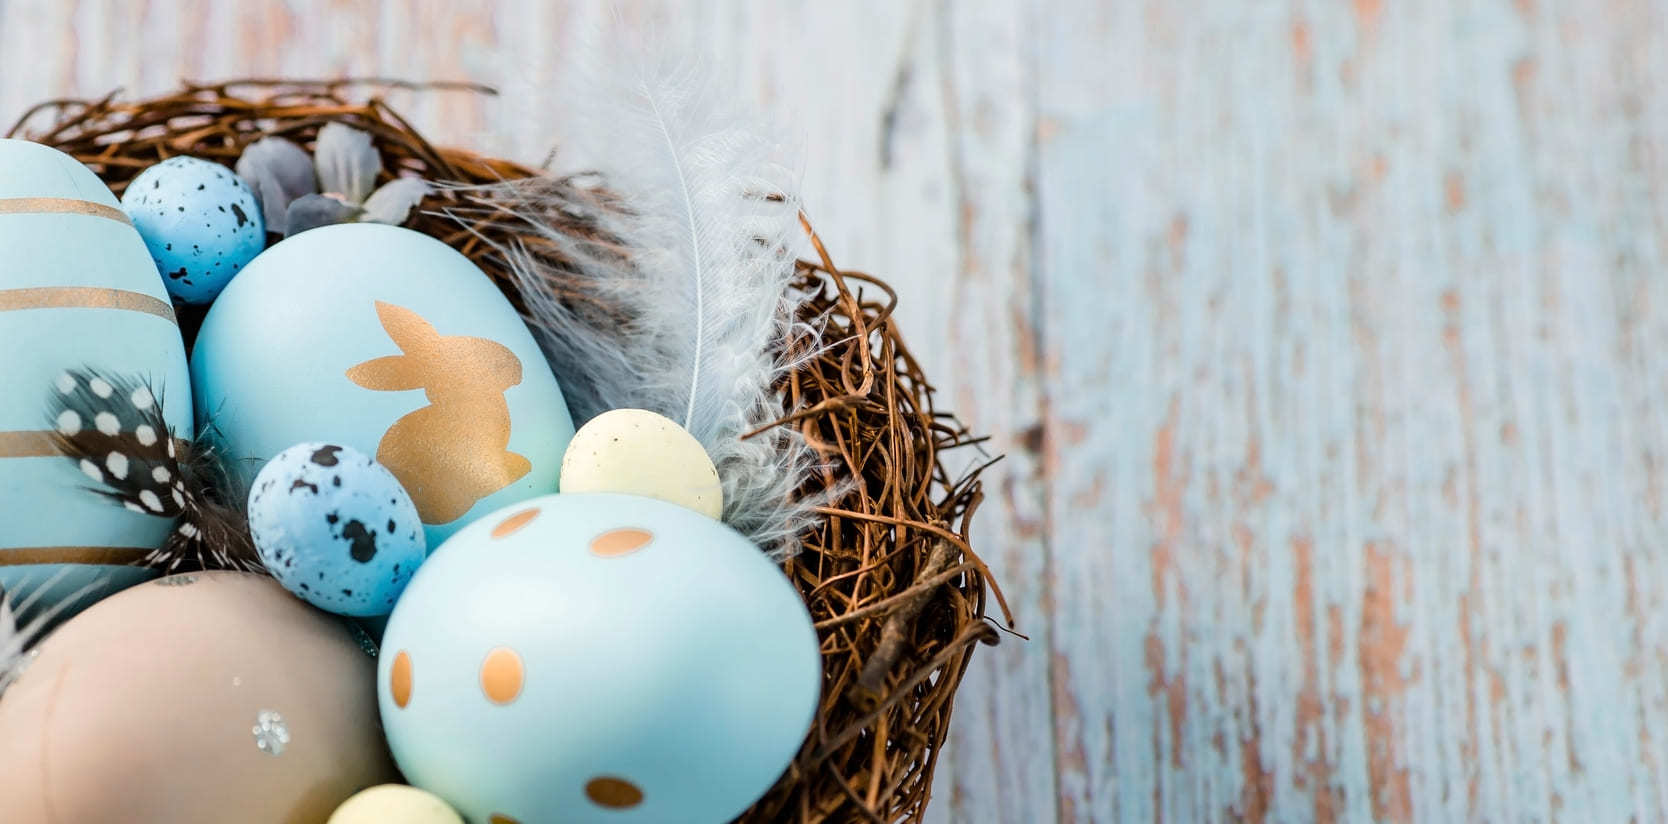 Easter eggs in pastel colors against a rustic wooden board